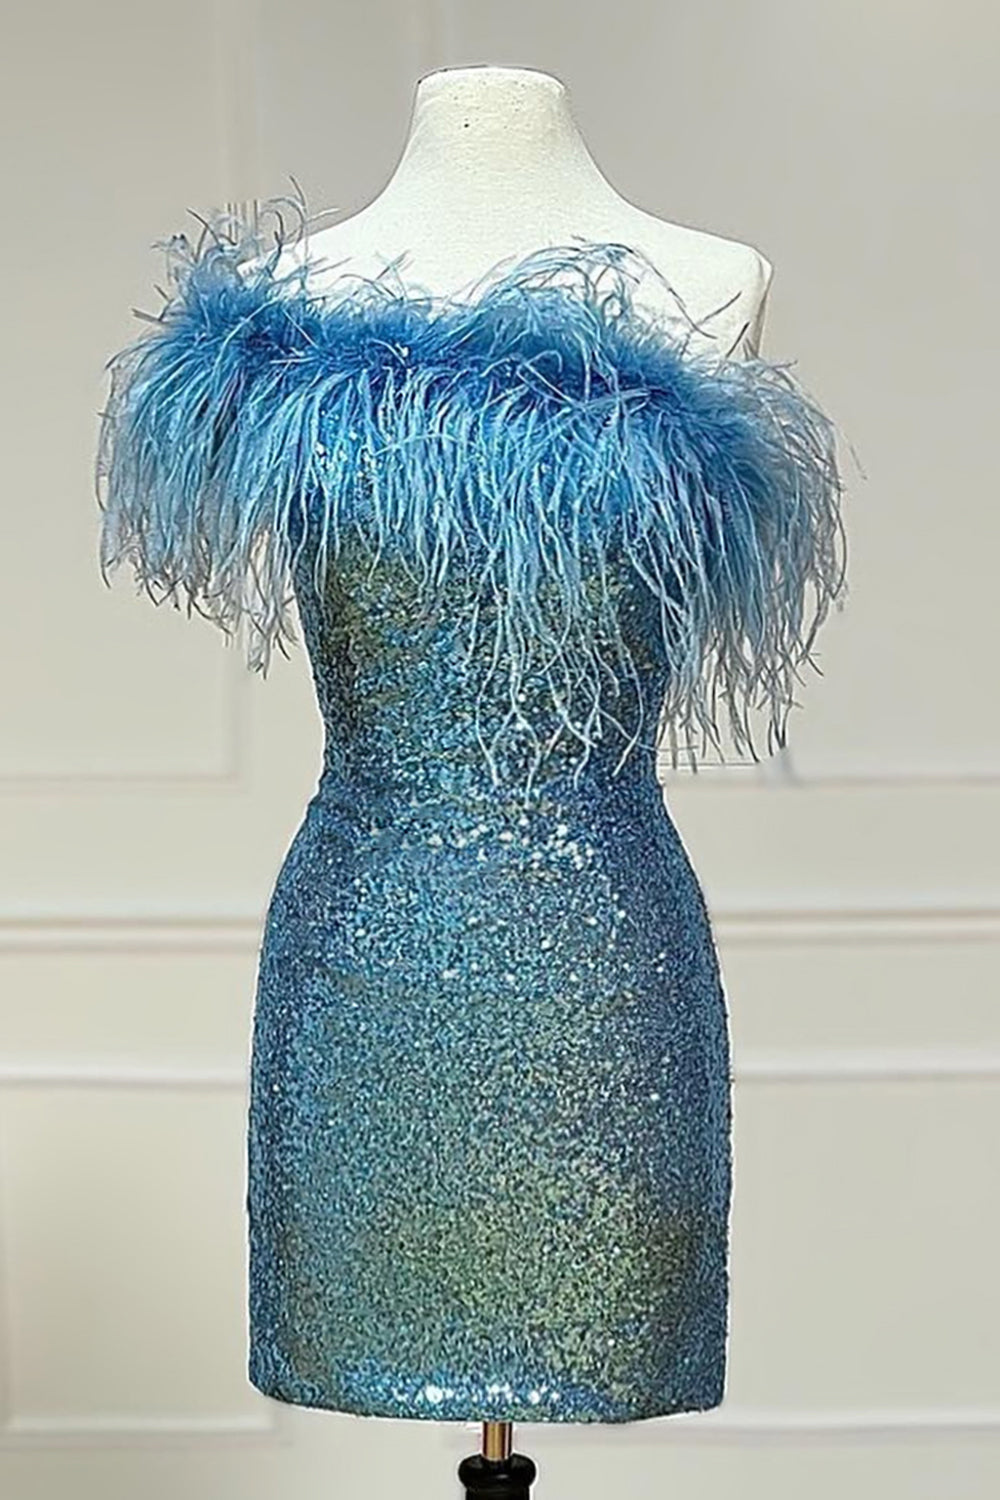 Light Blue Sparkly Tight Sequins Corset Homecoming Dress with Feathers outfit, Black Wedding Dress